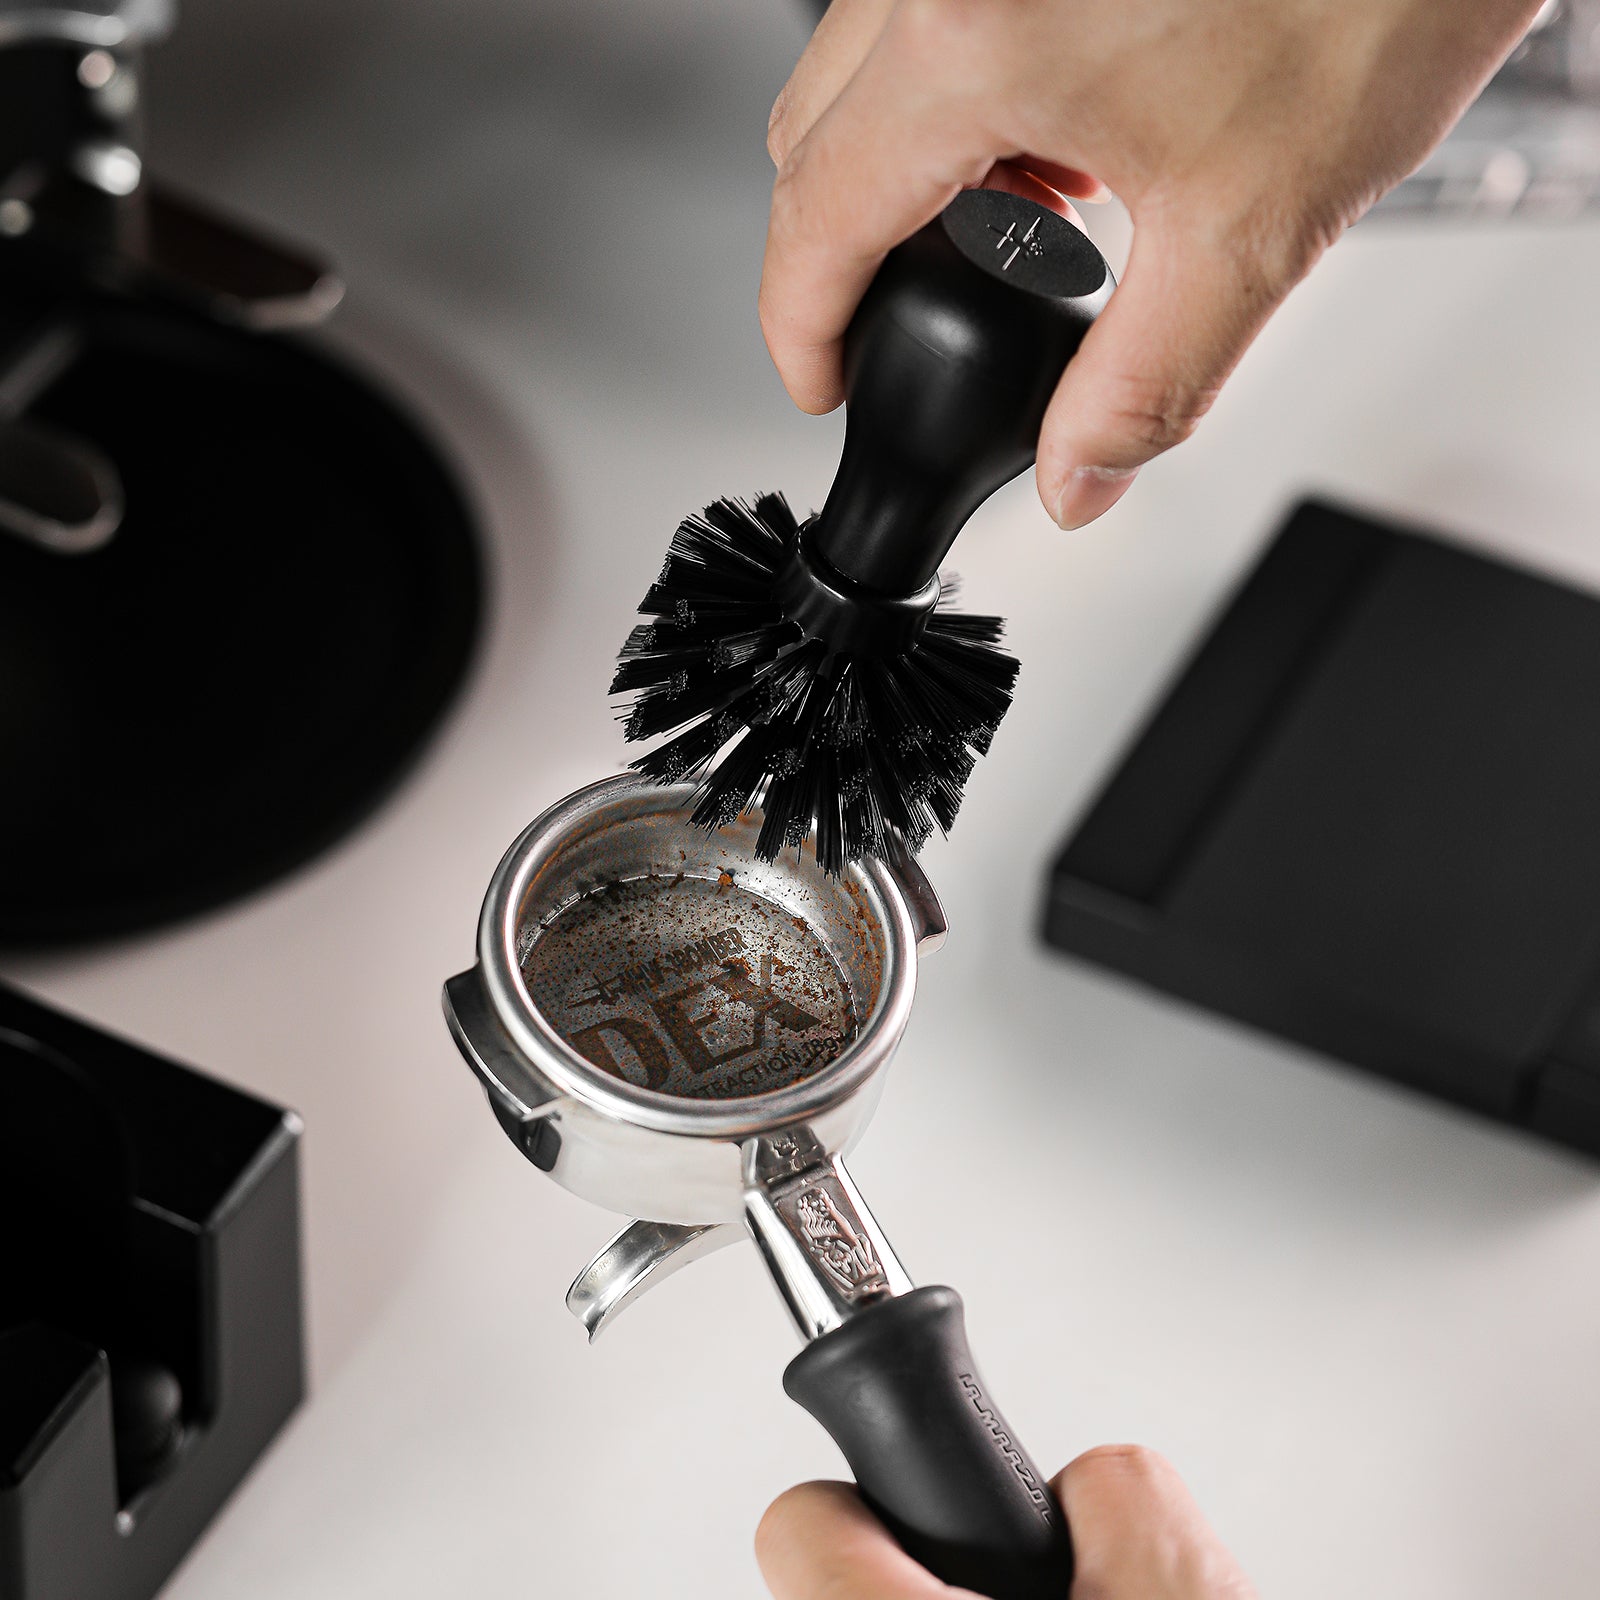 MHW-3BOMBER Coffee Portafilter Cleaning Brush